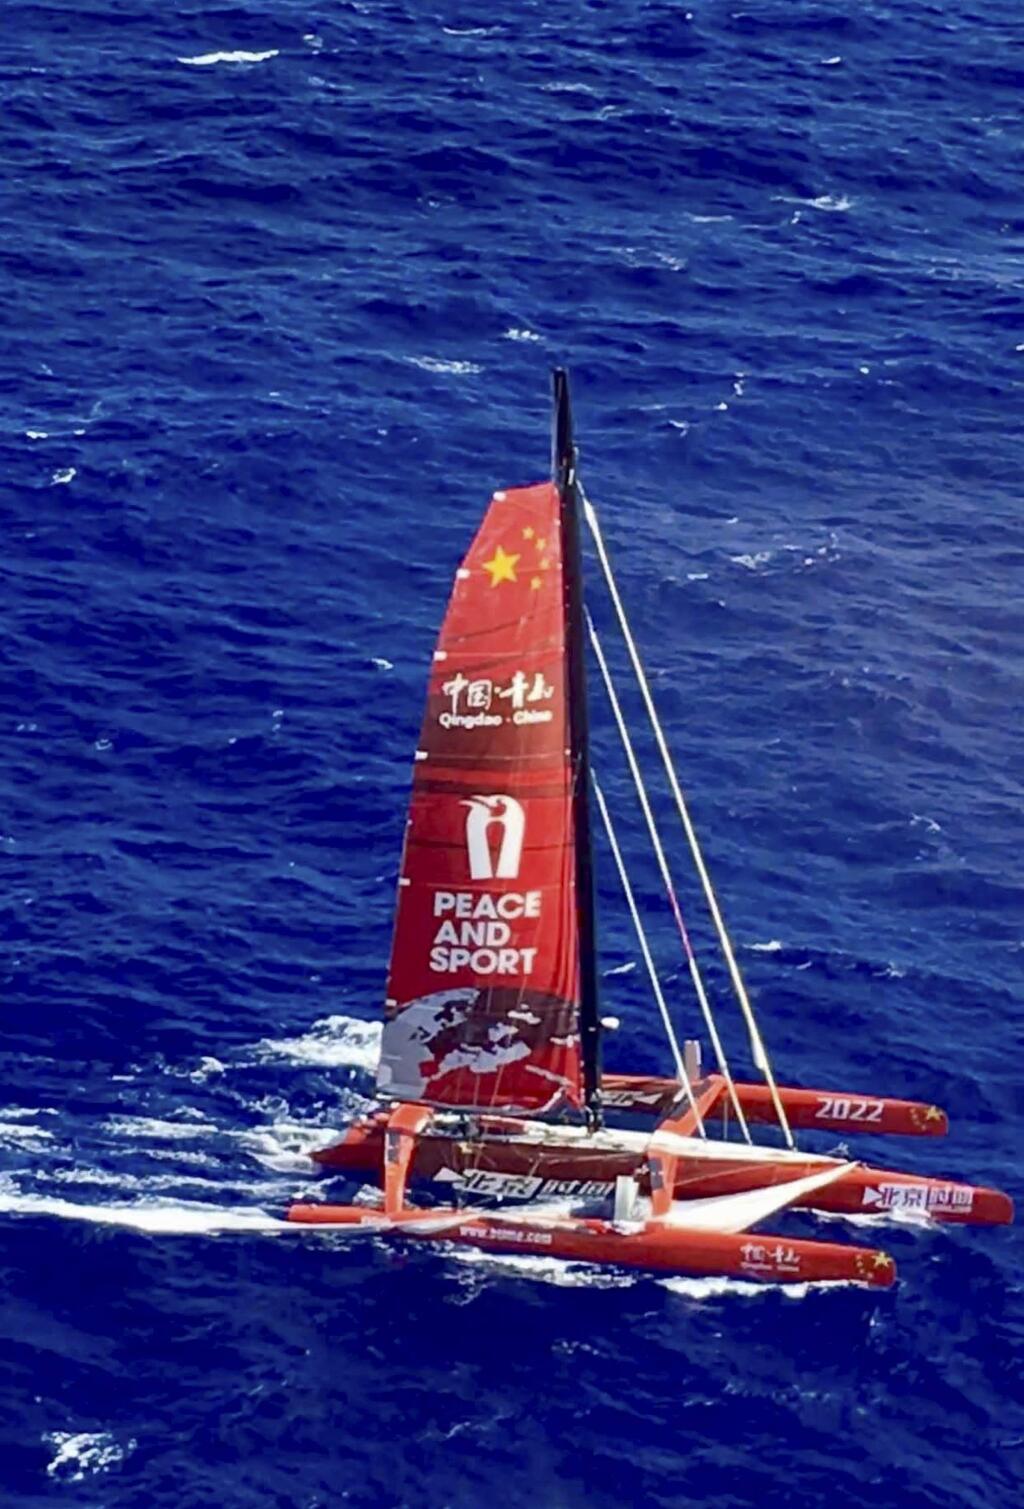 This photo provided by the U.S. Coast Guard shows a trimaran that the U.S. Coast Guard has located in Hawaii on Tuesday, Oct. 25, 2016. Guo Chuan, a Chinese man attempting to set a sailing record from San Francisco to Shanghai, has been reported missing from the yacht. (U.S. Coast Guard/Air Station Barbers Point via AP)